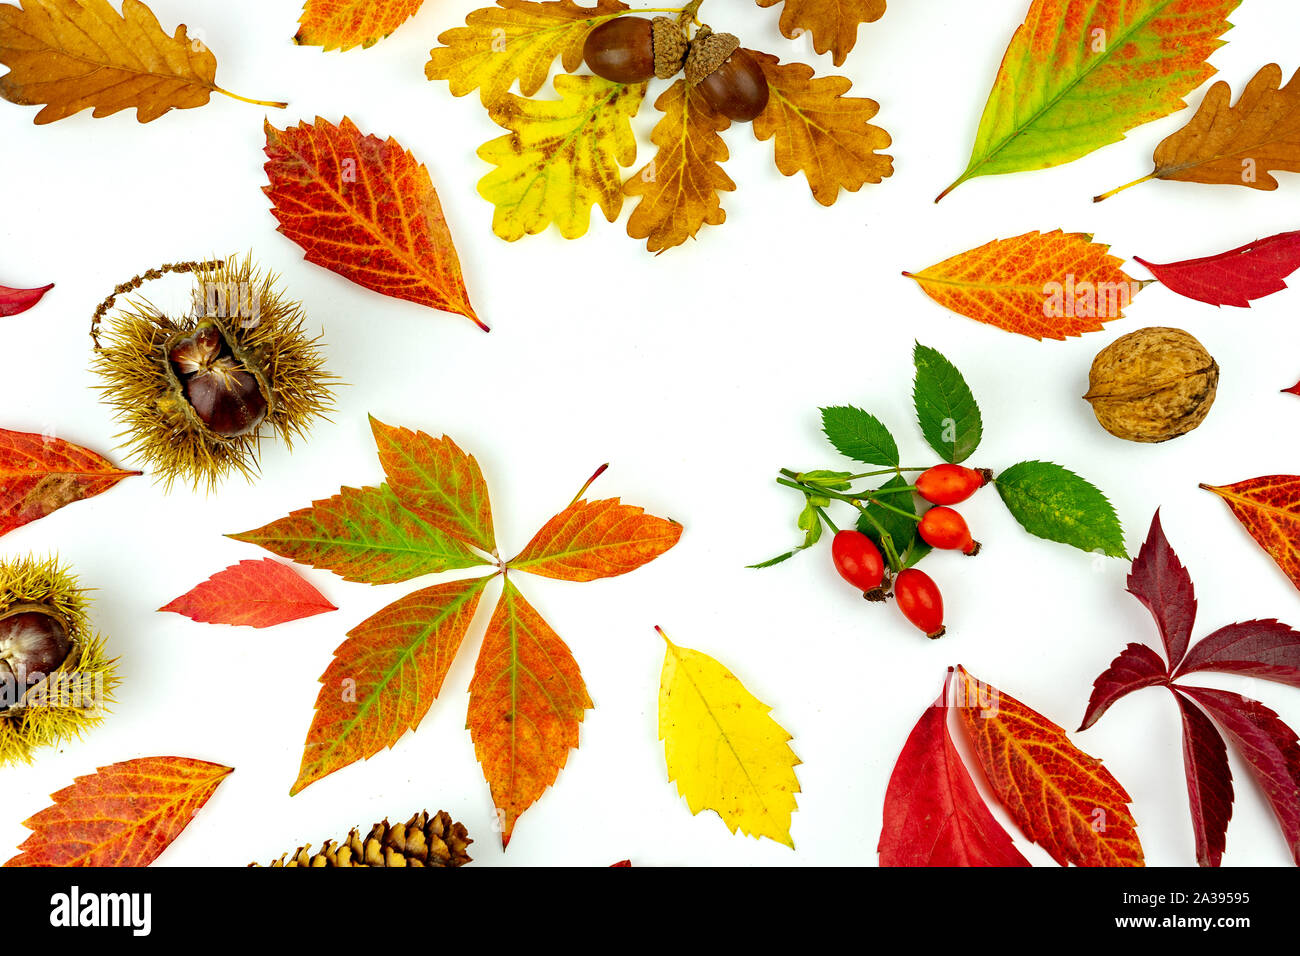 colorful autumn leaves and yields pattern isolated on white background. flat lay, overhead view Stock Photo